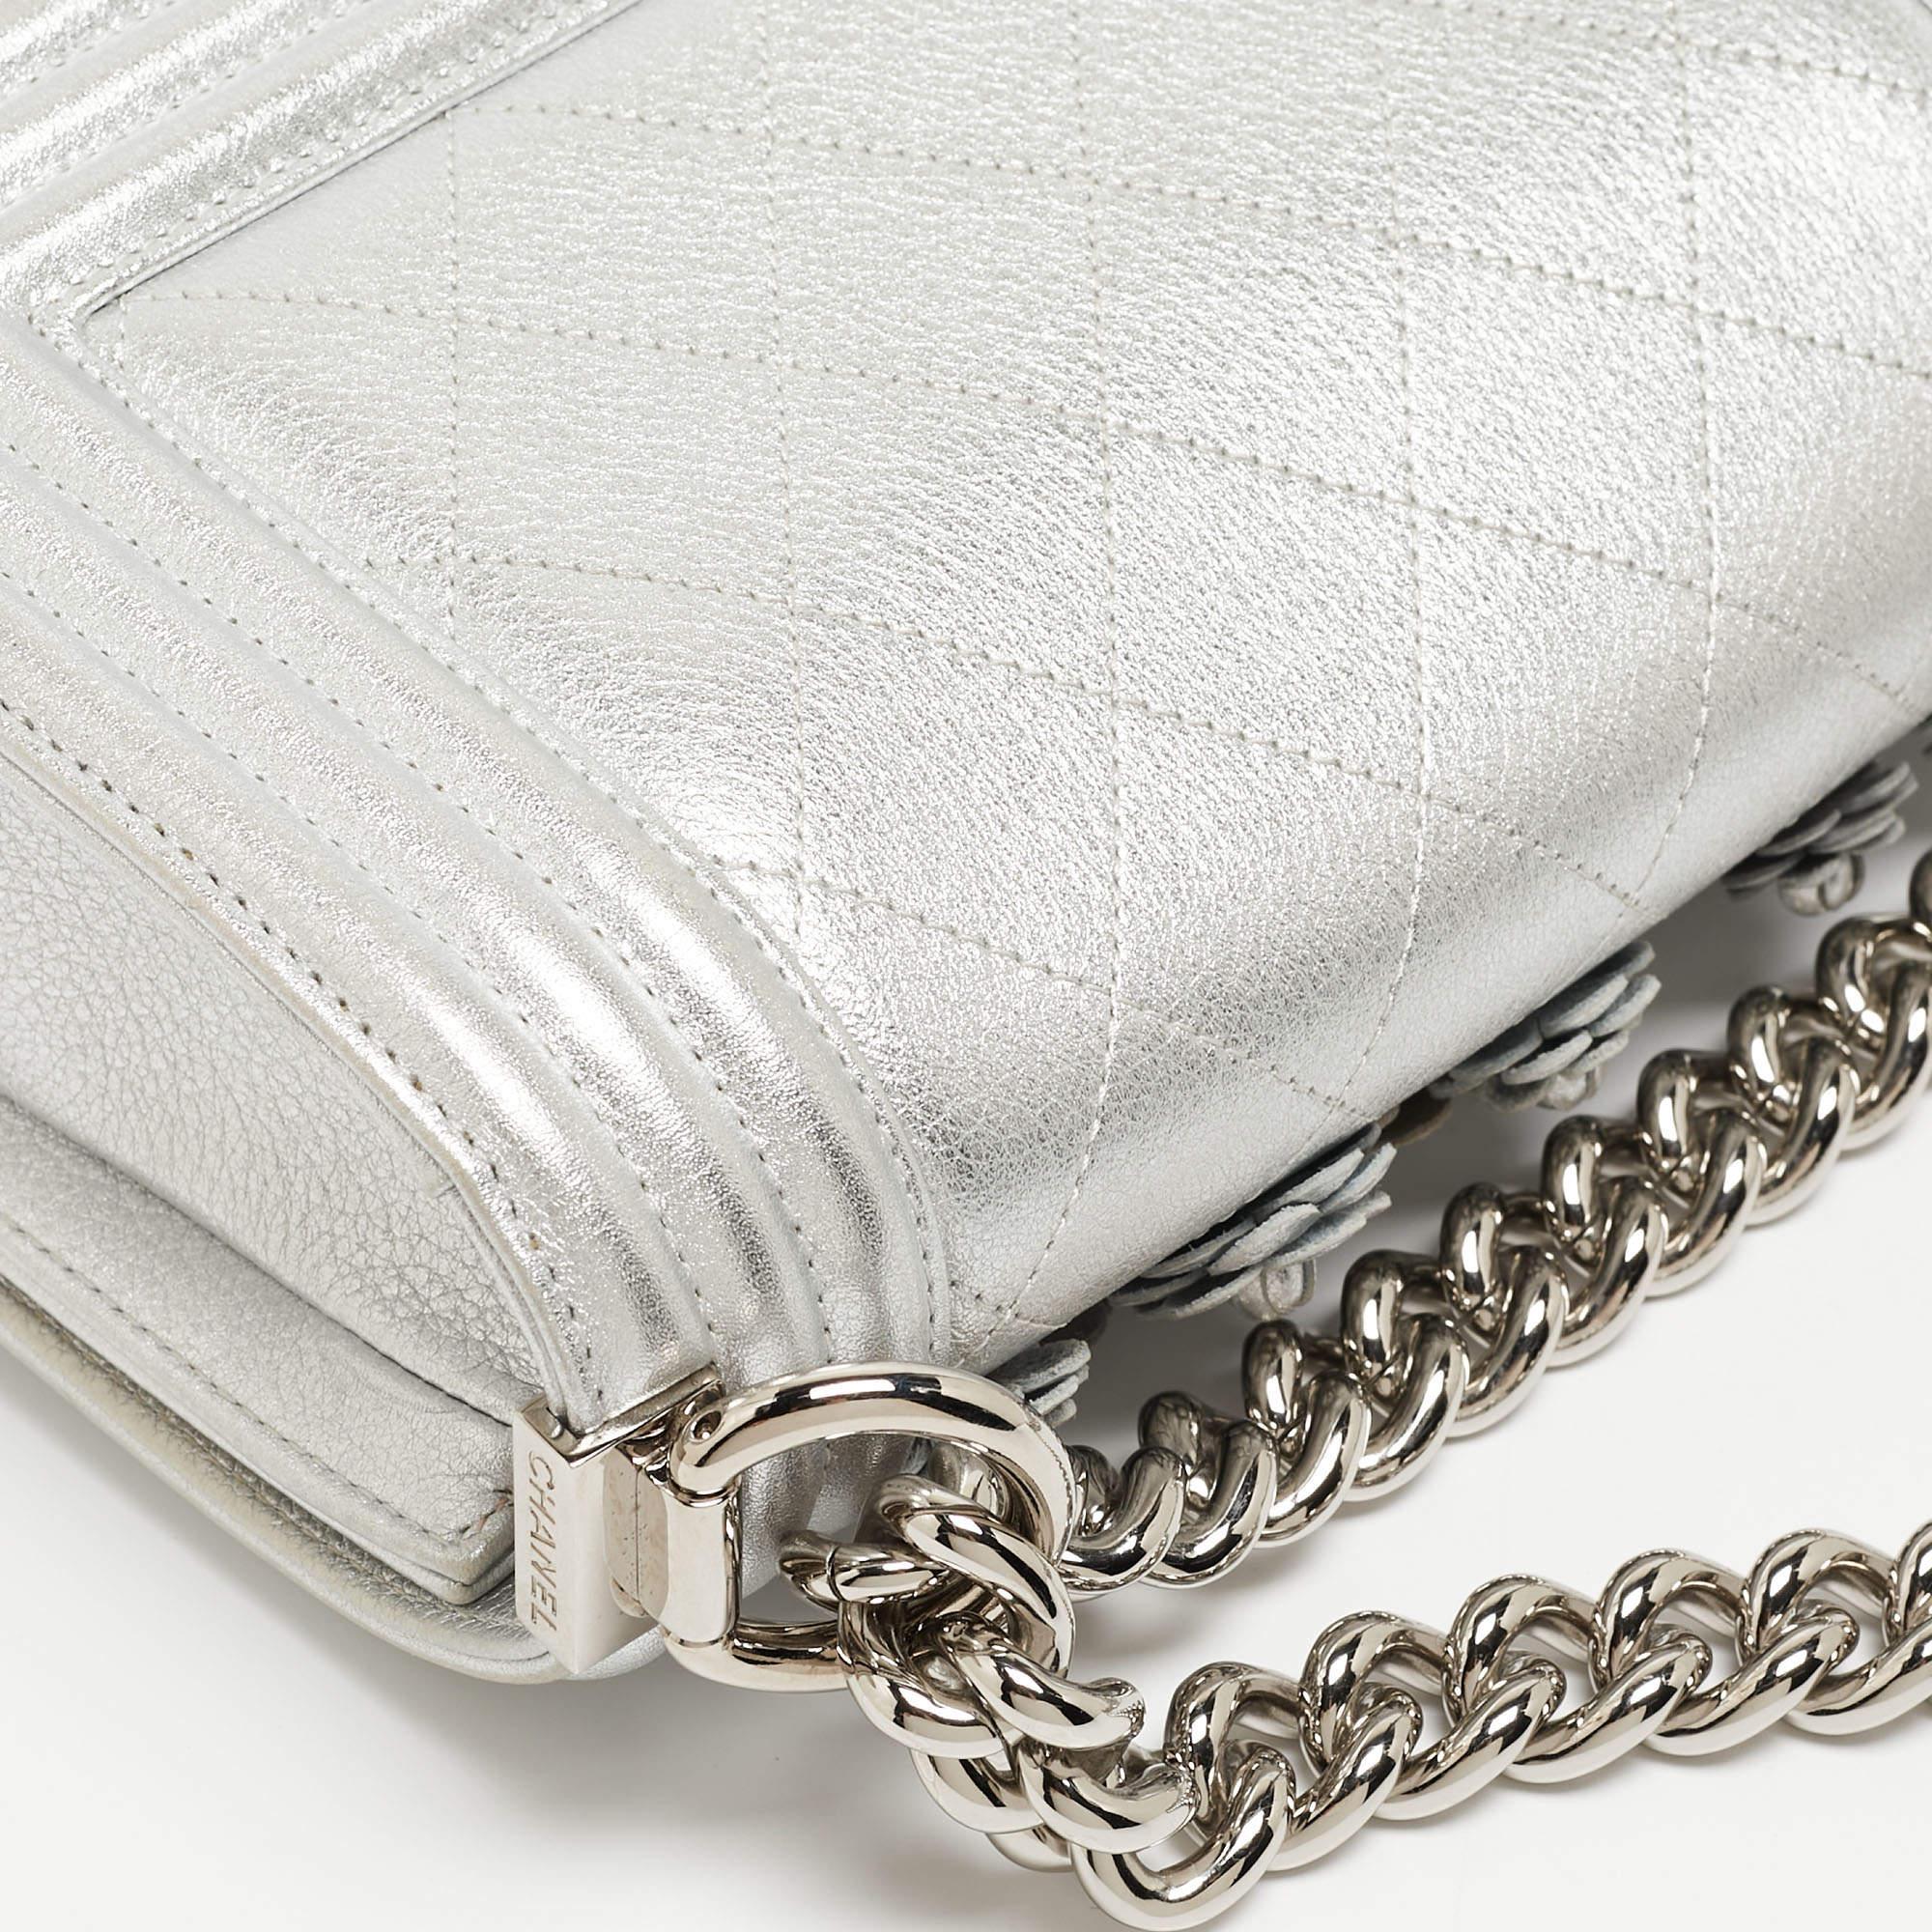 Chanel Silver Quilted Leather Small Camellia Applique Boy Flap Bag 6